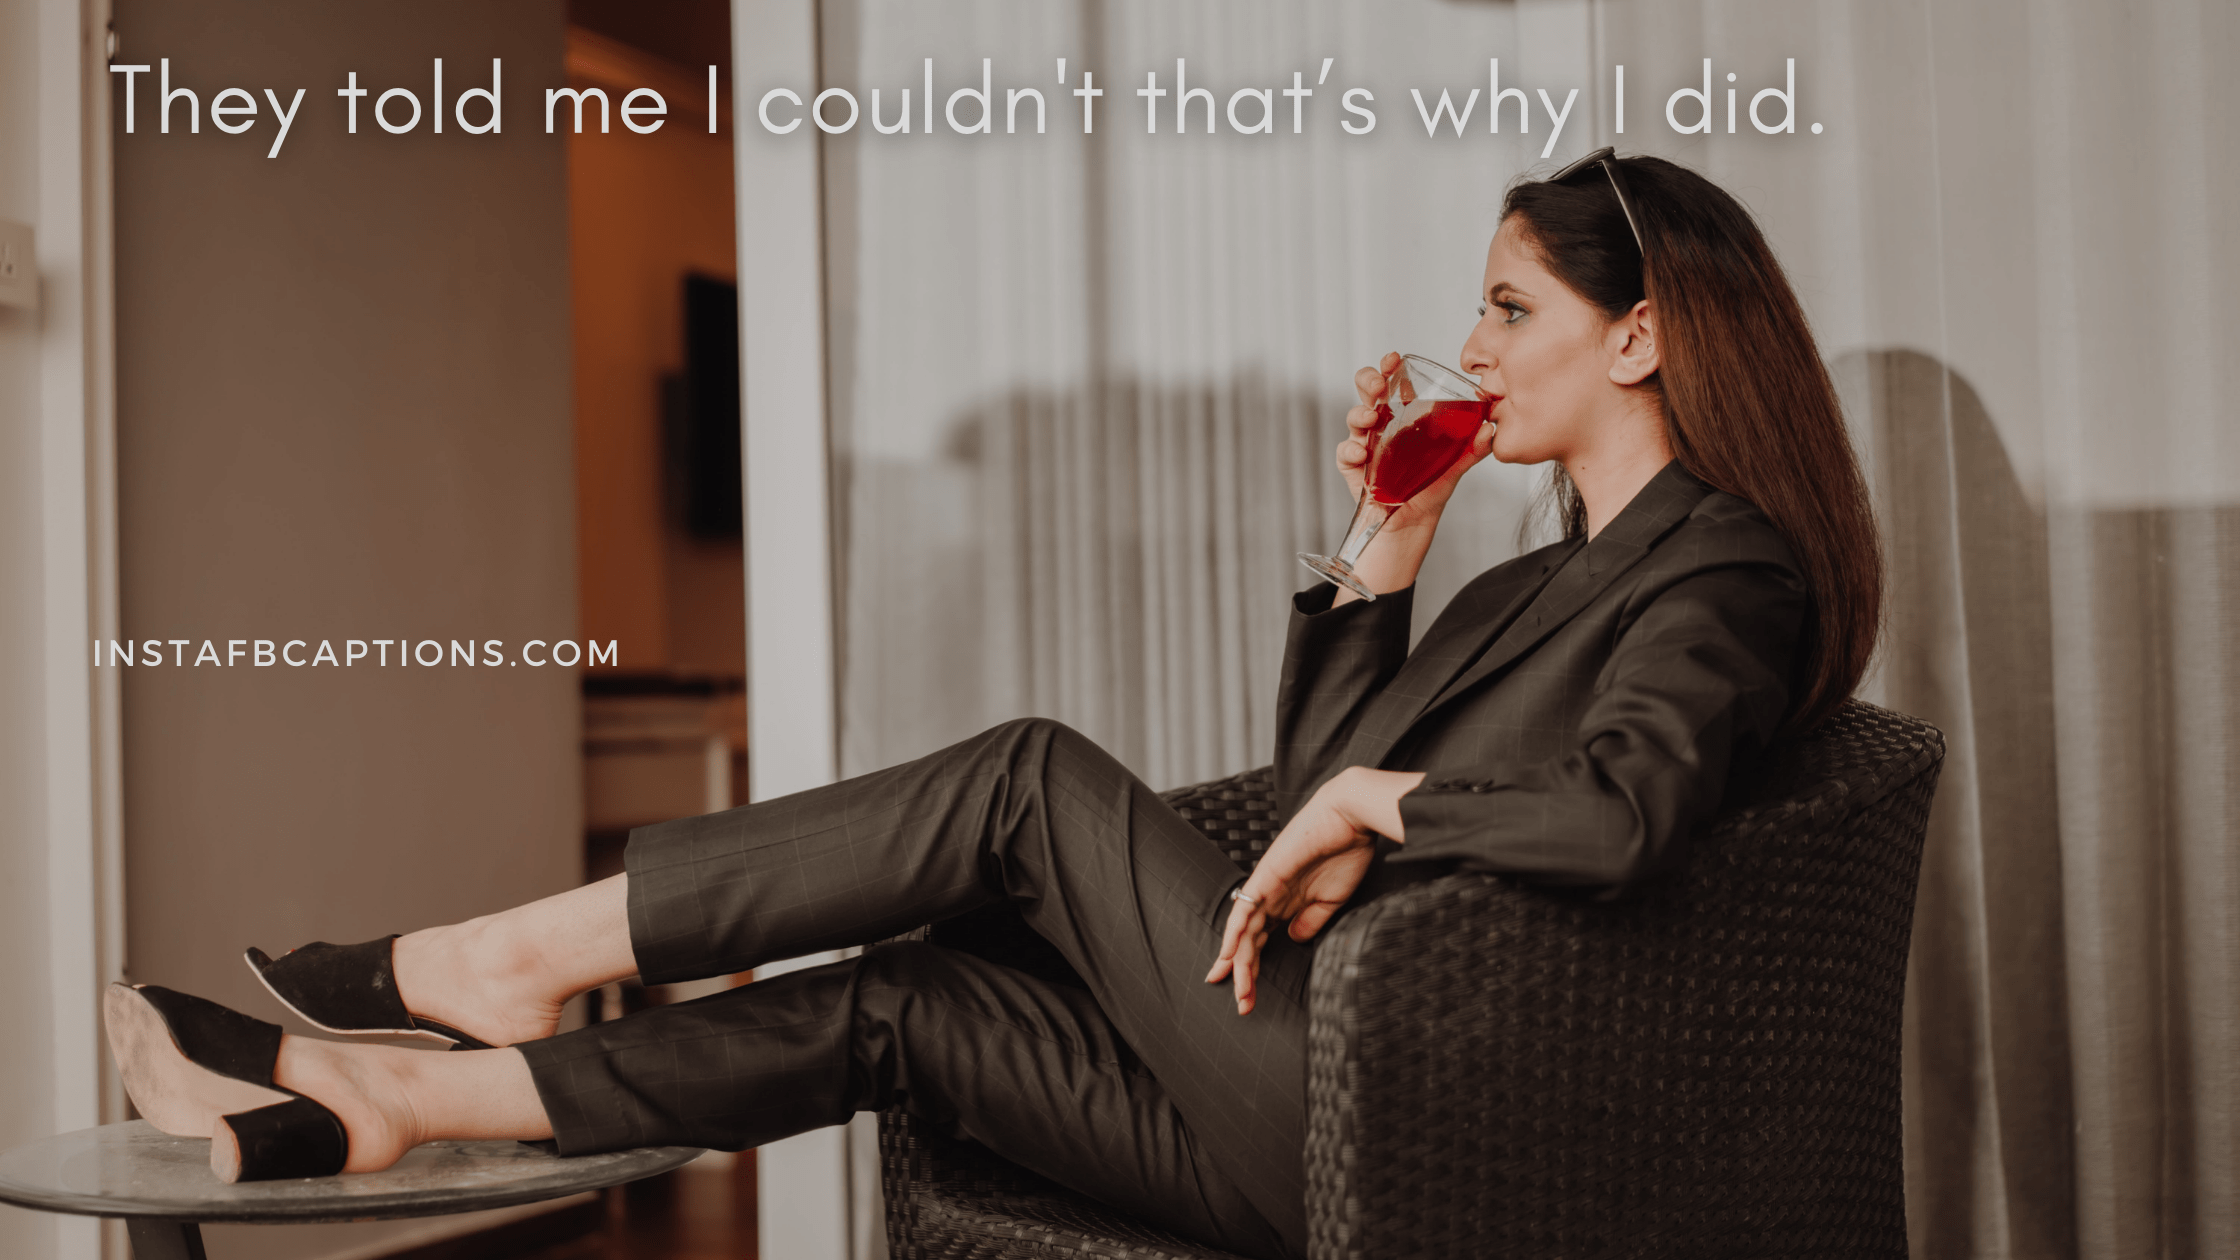 They told me I couldn't that’s why I did.  - Best Girl Boss Captions For Your Selfies - [New] Boss Captions for Instagram Pictures with Boss in 2023